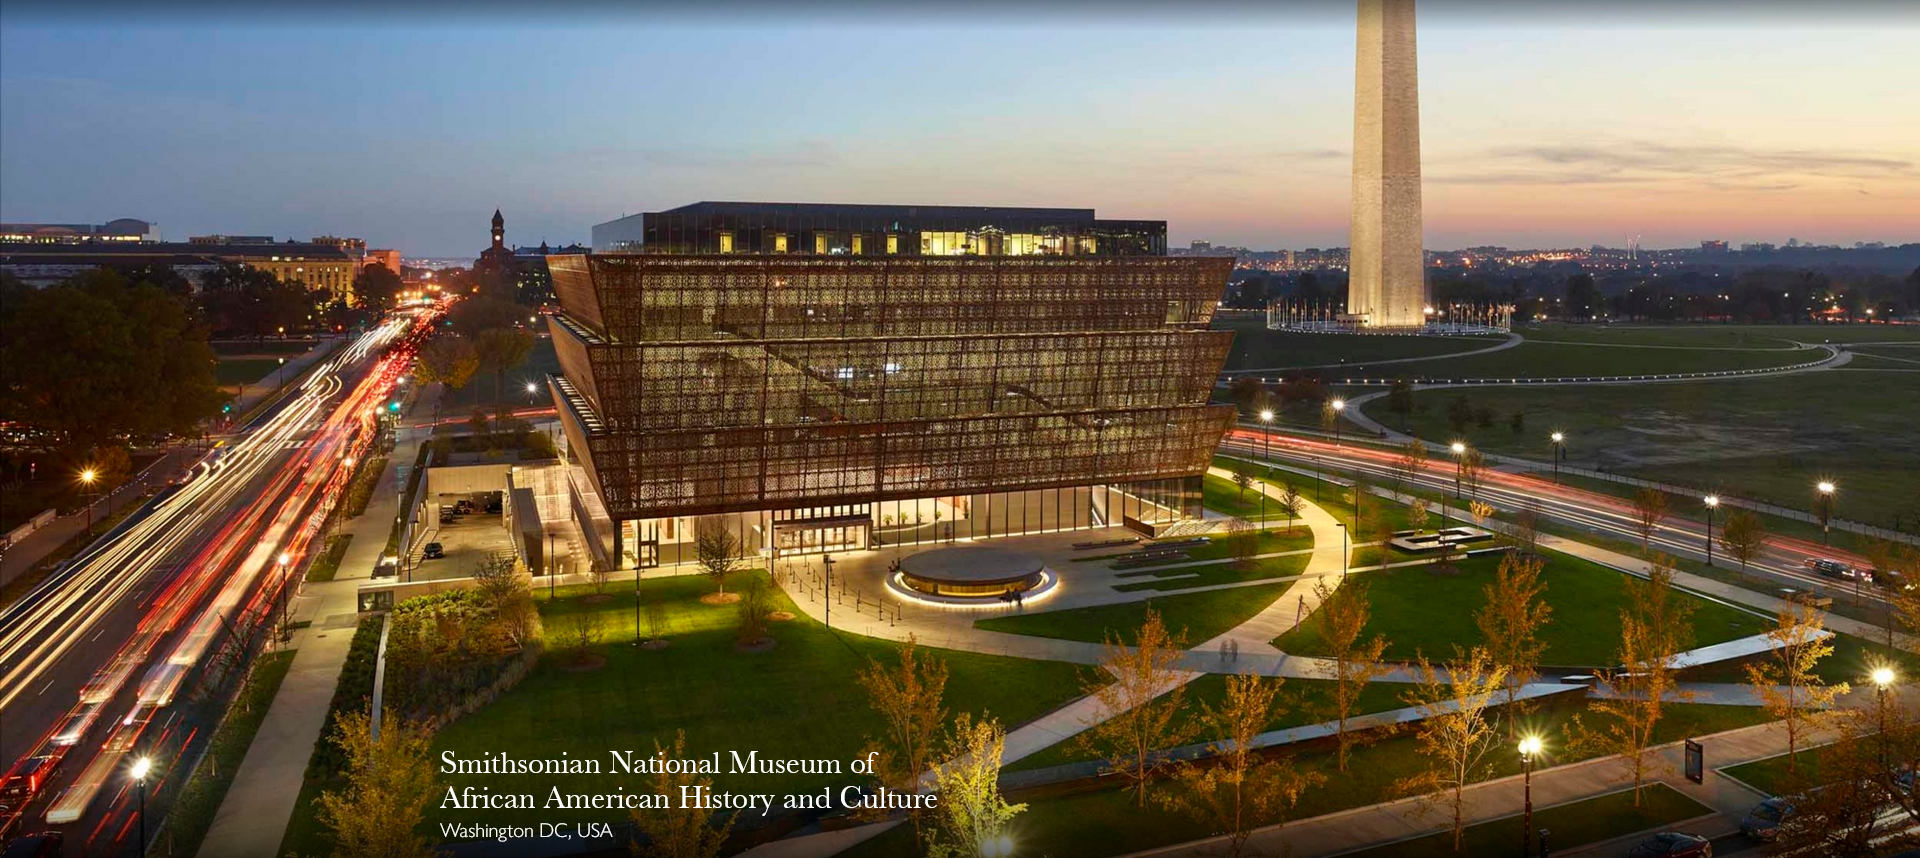 Screenshot 2023-02-20 at 14-50-27 Smithsonian National Museum of African American History and Culture - Adjaye Associates.png